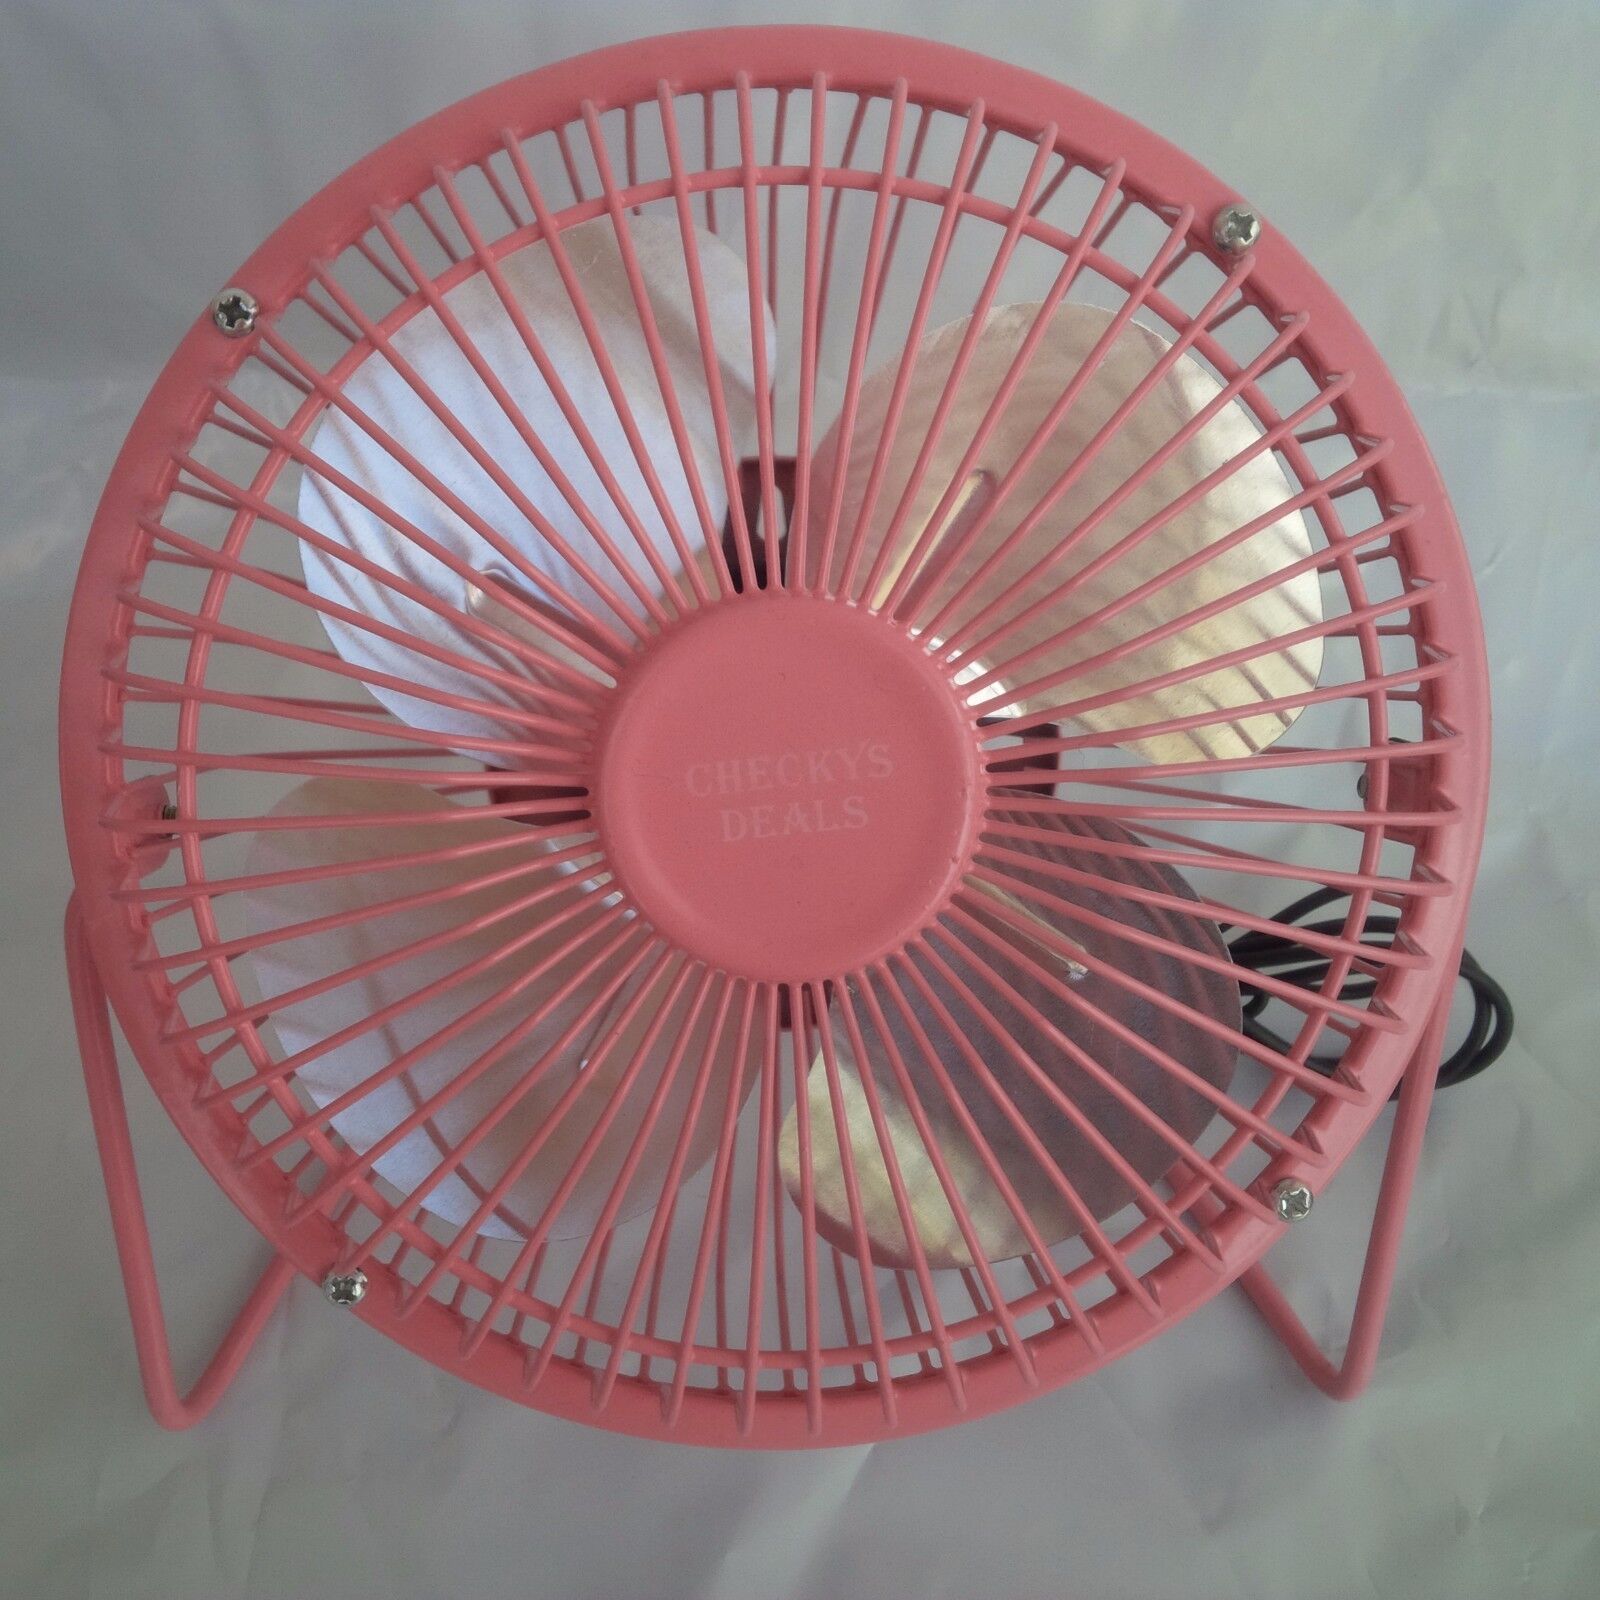 CHECKYS DEALS 6 INCH METAL FAN USB CONNECT PINK COMPUTER OFFICE WORK HOME CAR